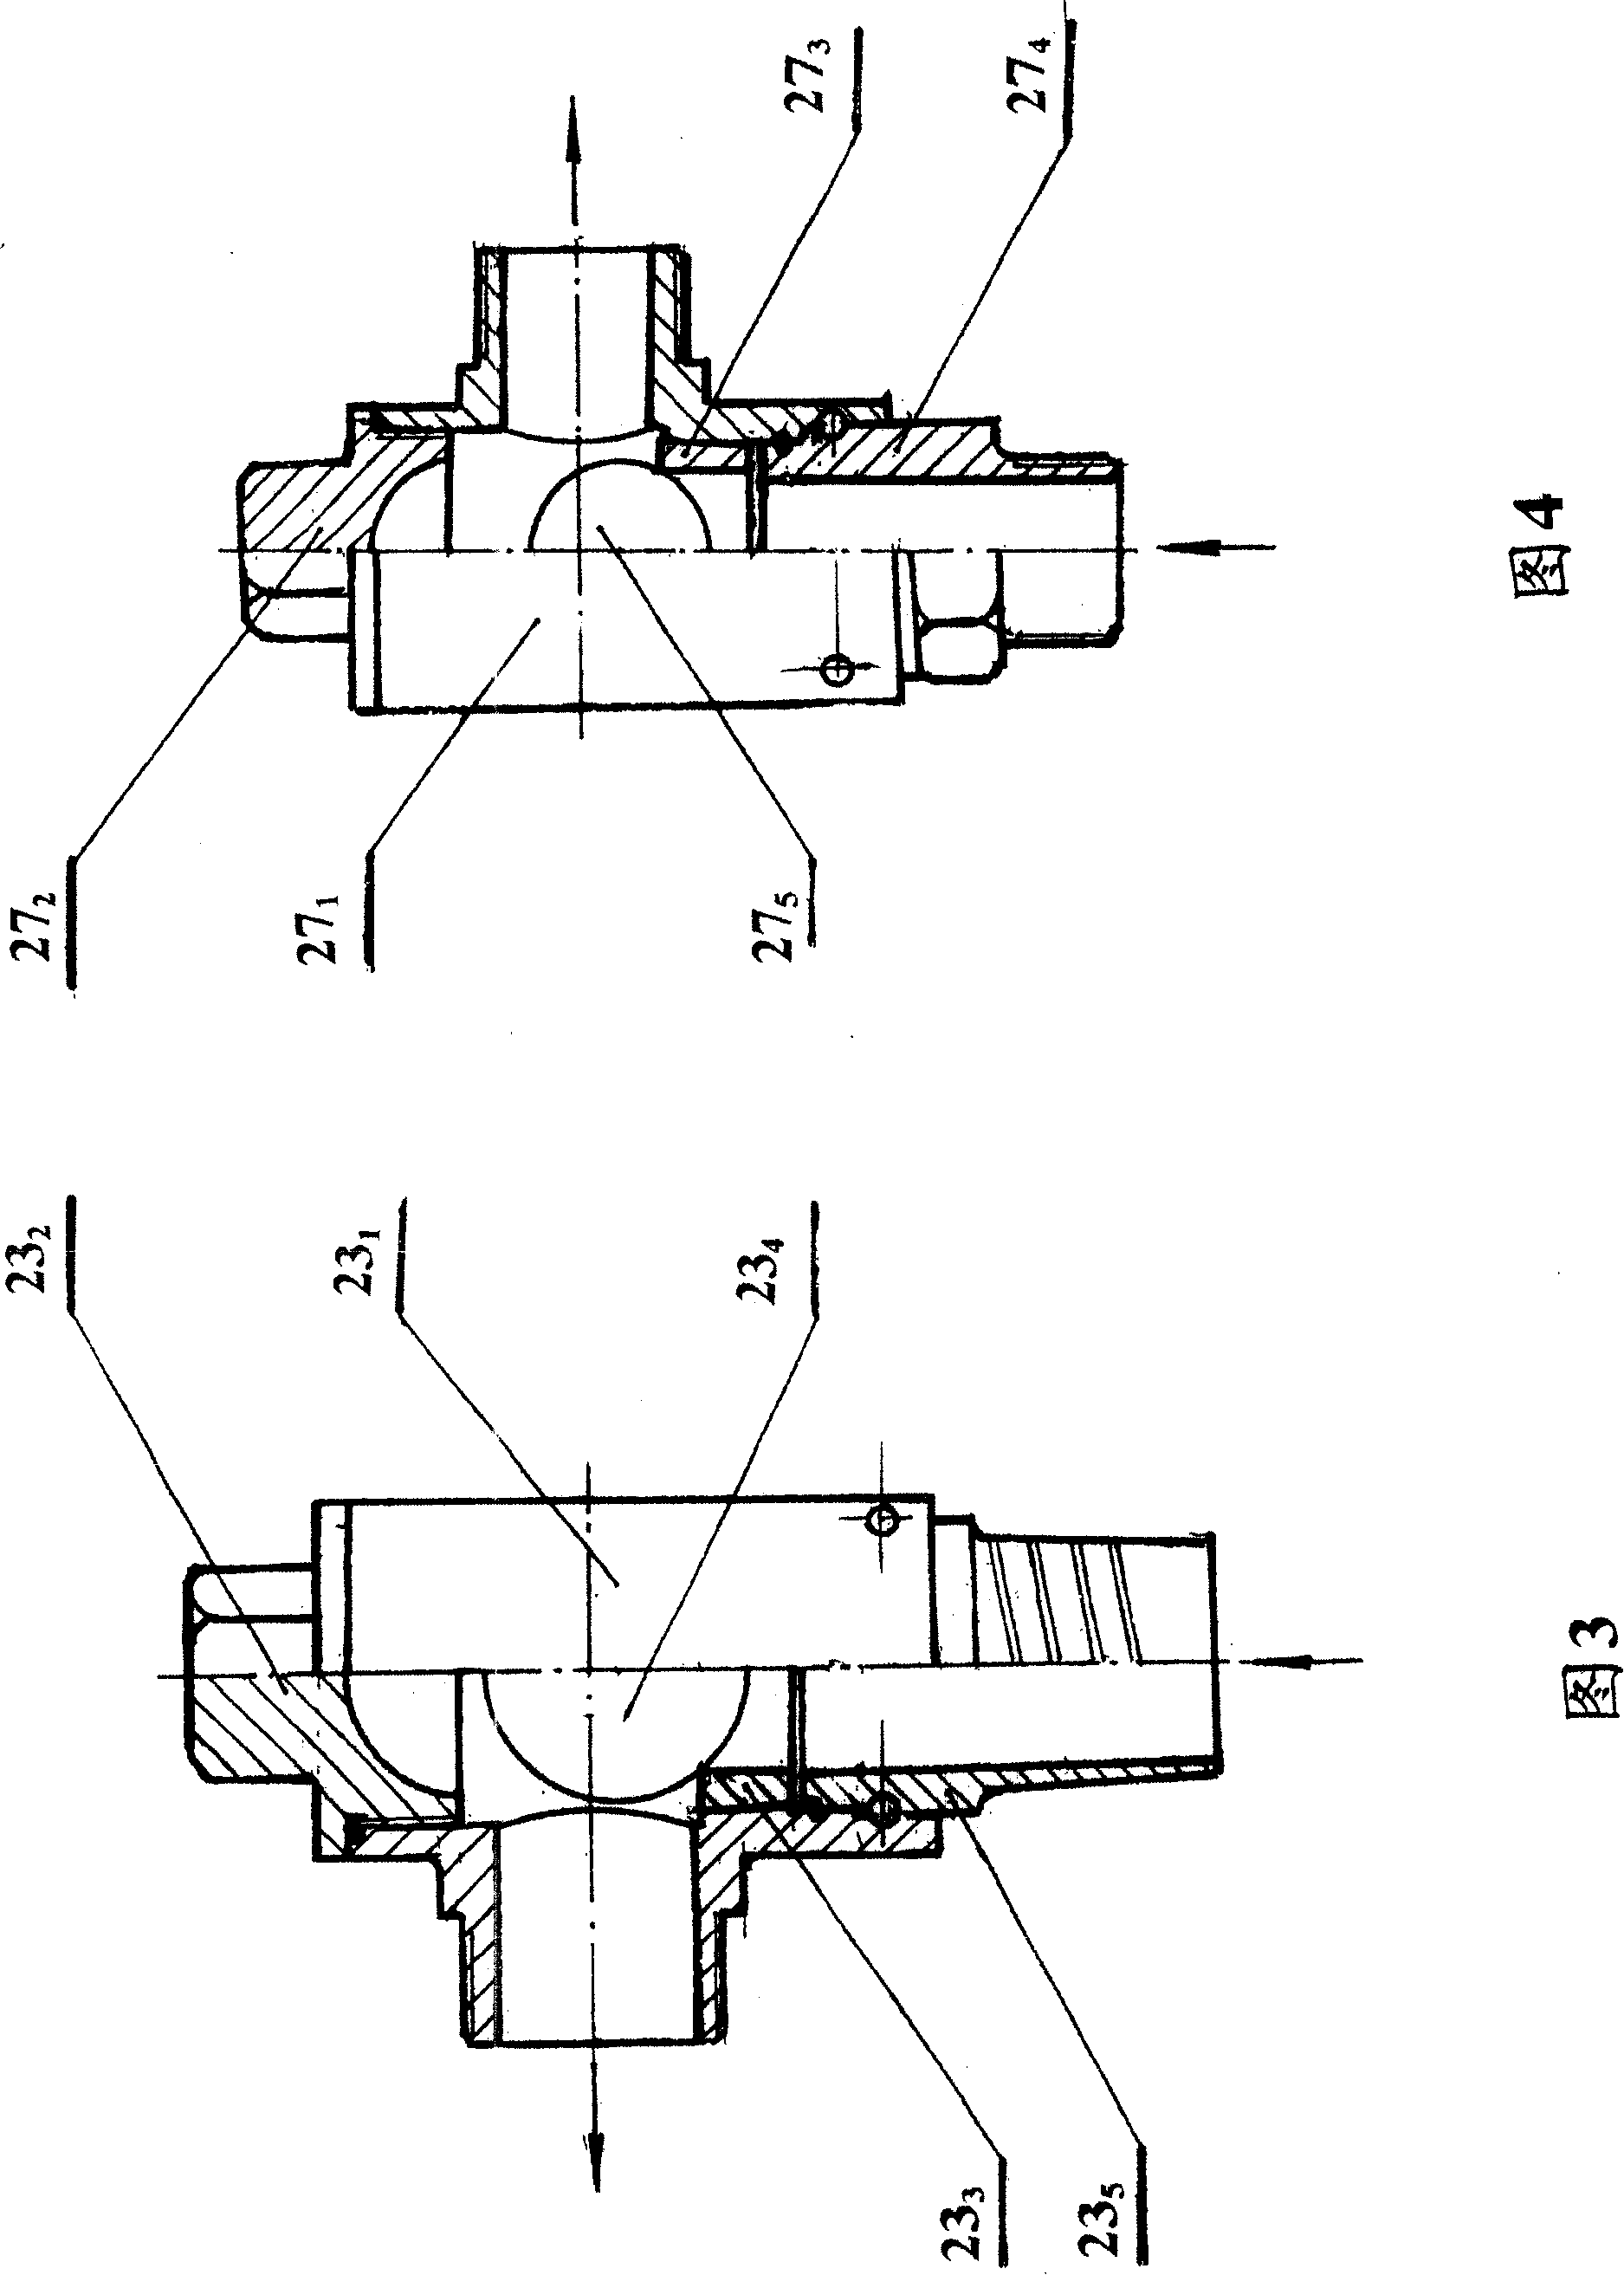 Double-body multi-cylinder high-pressure injection pump